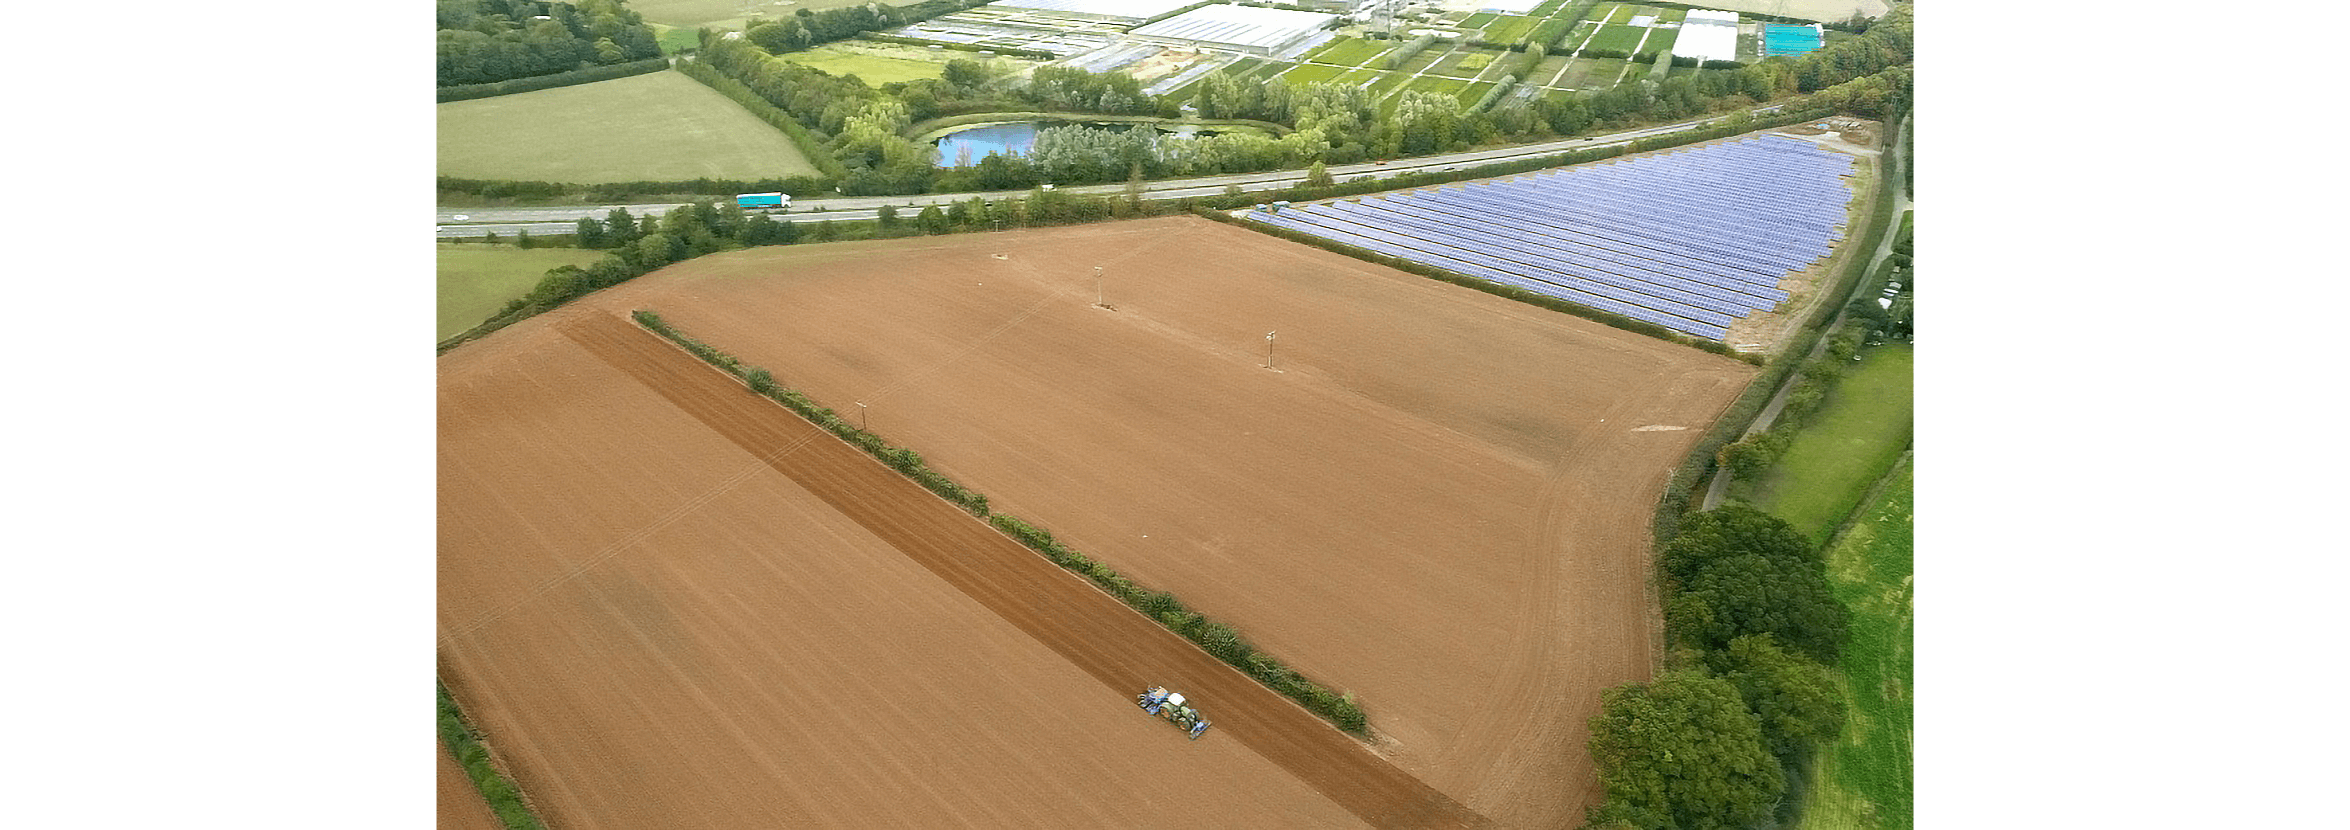 Aerial view of a tractor working a ploughed field.